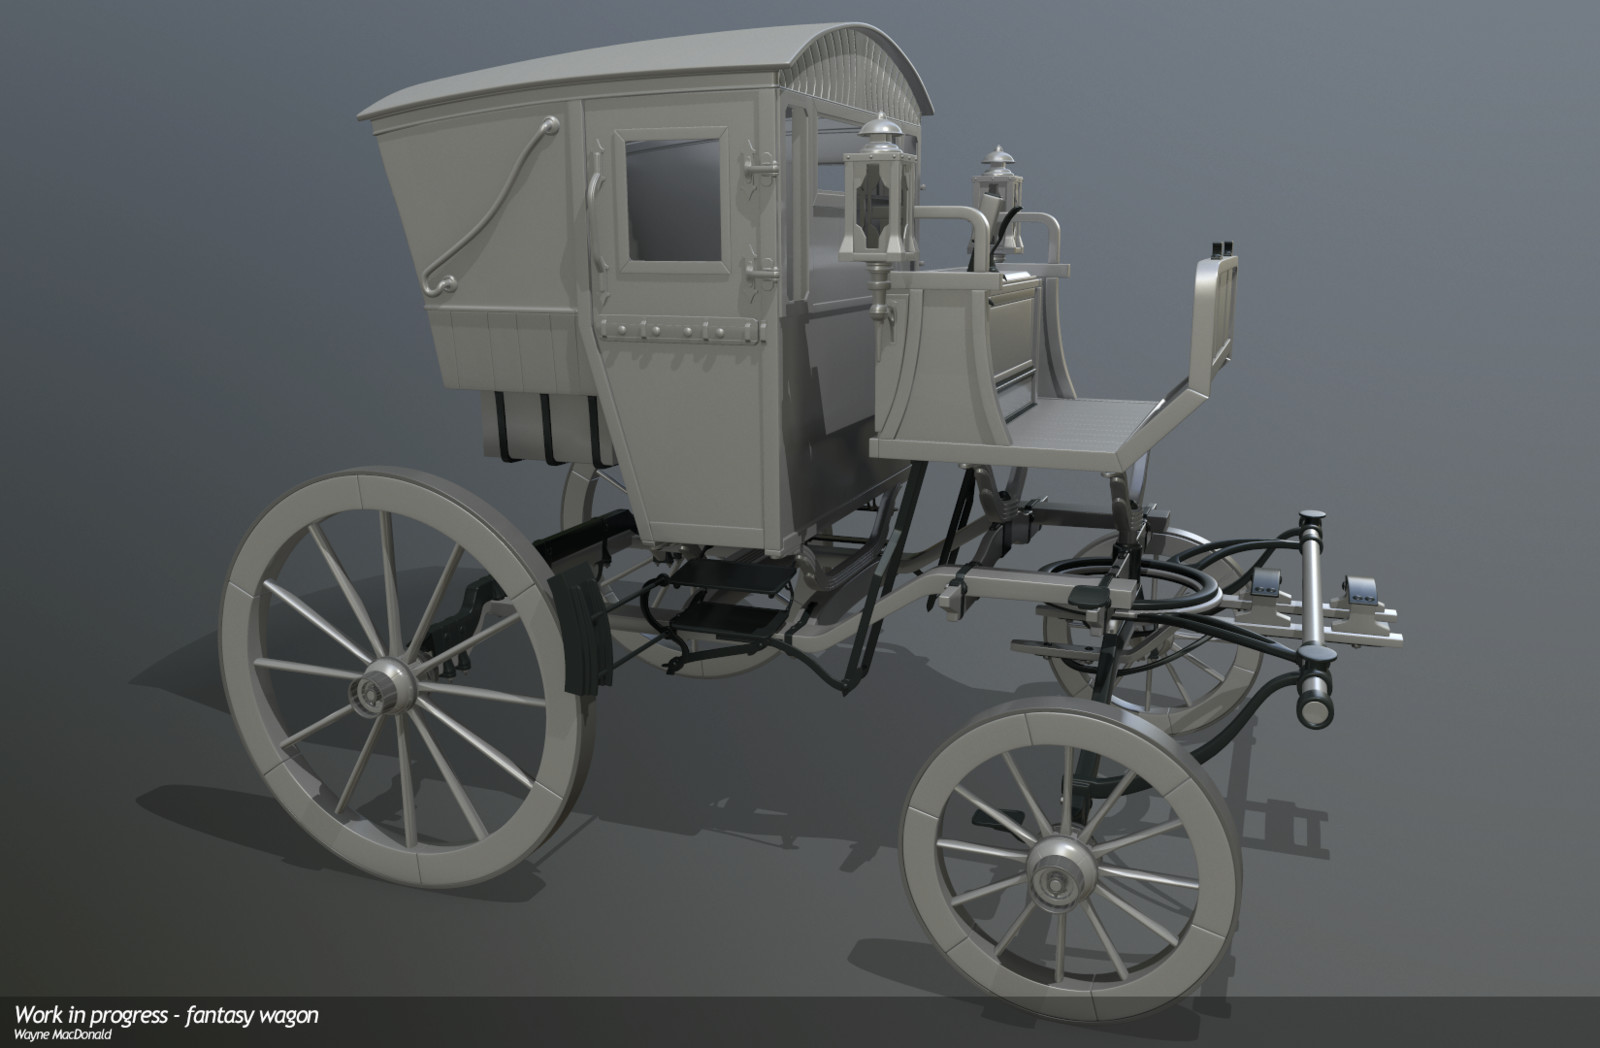 Wagon WIP - Mid/high poly, lots of detailing and wear to be added during texturing.